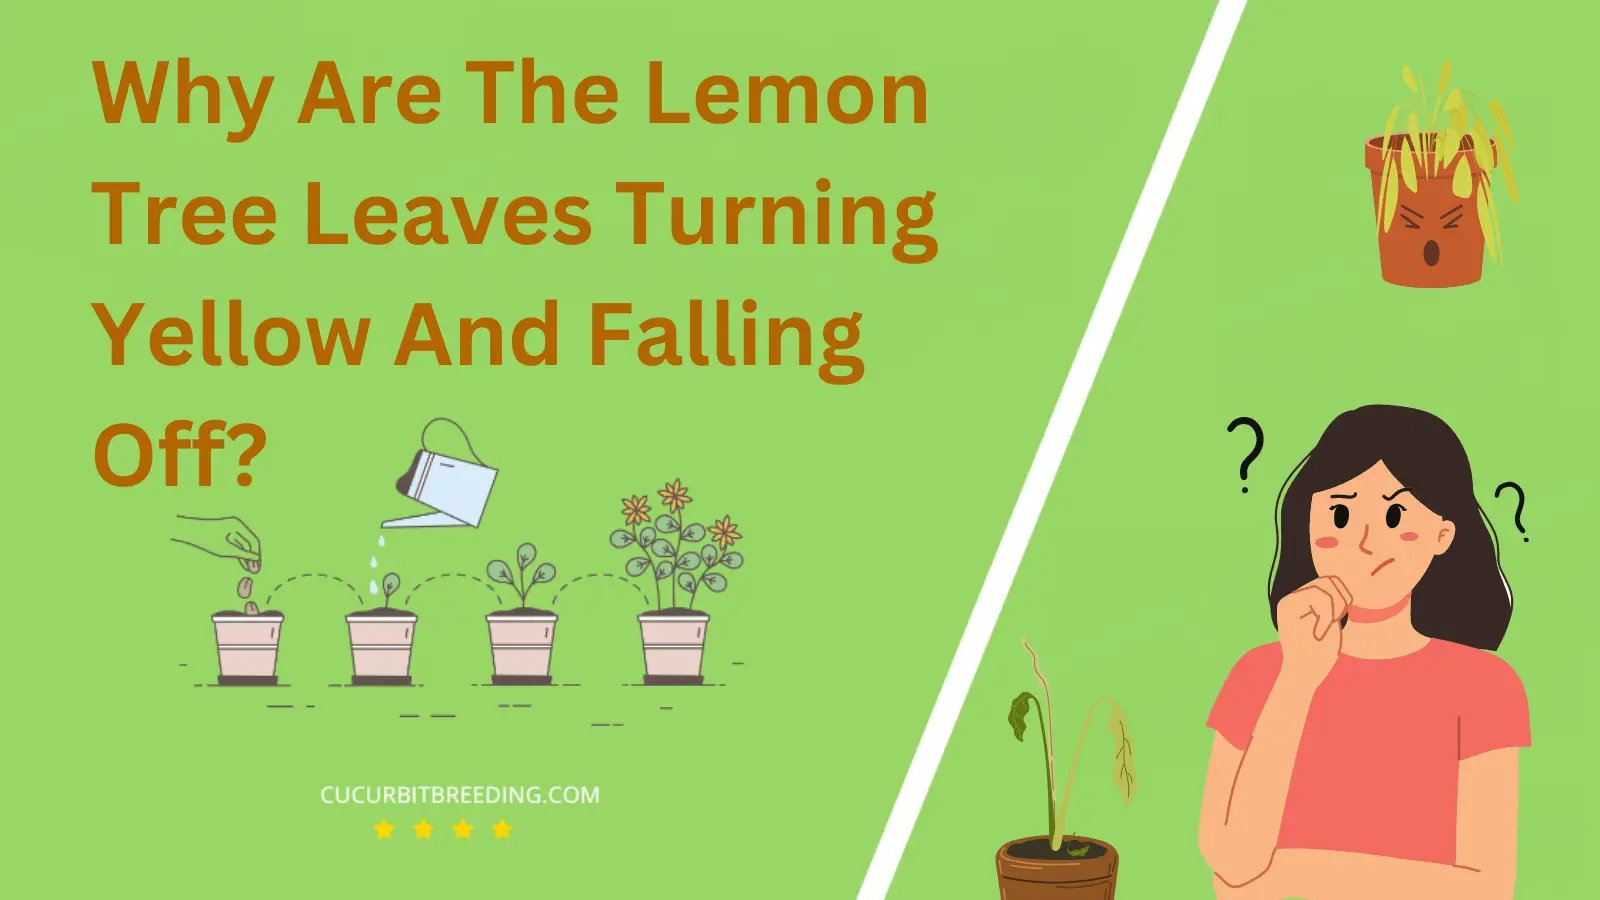 Why Are The Lemon Tree Leaves Turning Yellow And Falling Off